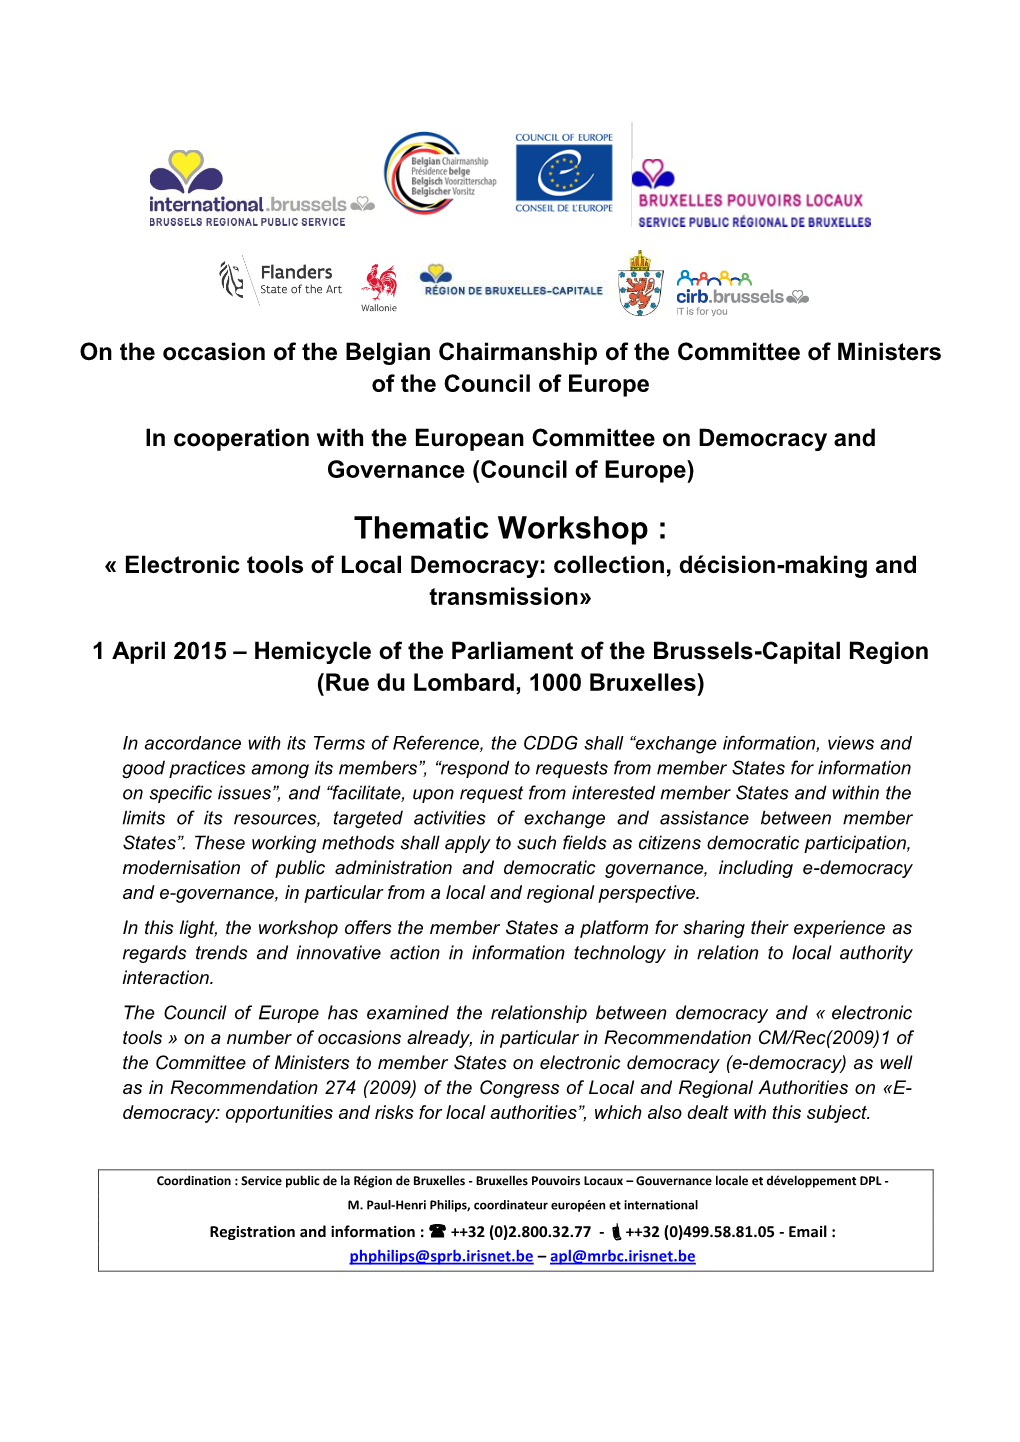 Thematic Workshop : « Electronic Tools of Local Democracy: Collection, Décision-Making and Transmission»